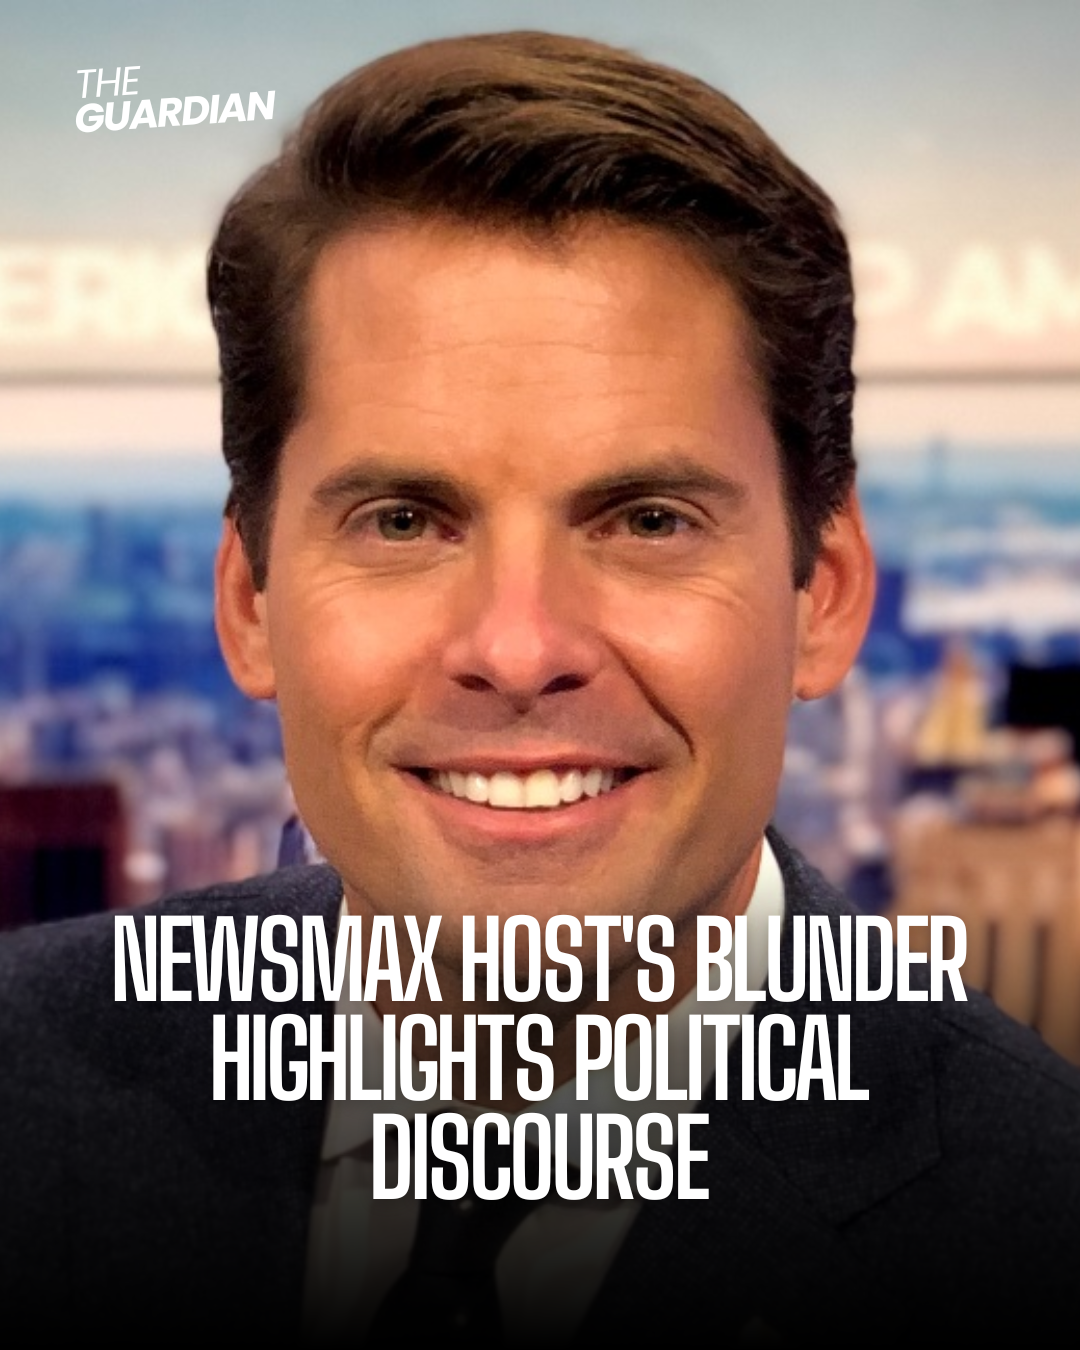 In a recent programme on Newsmax, host Rob Finnerty attempted to identify apparent gaffes by President Joe Biden.